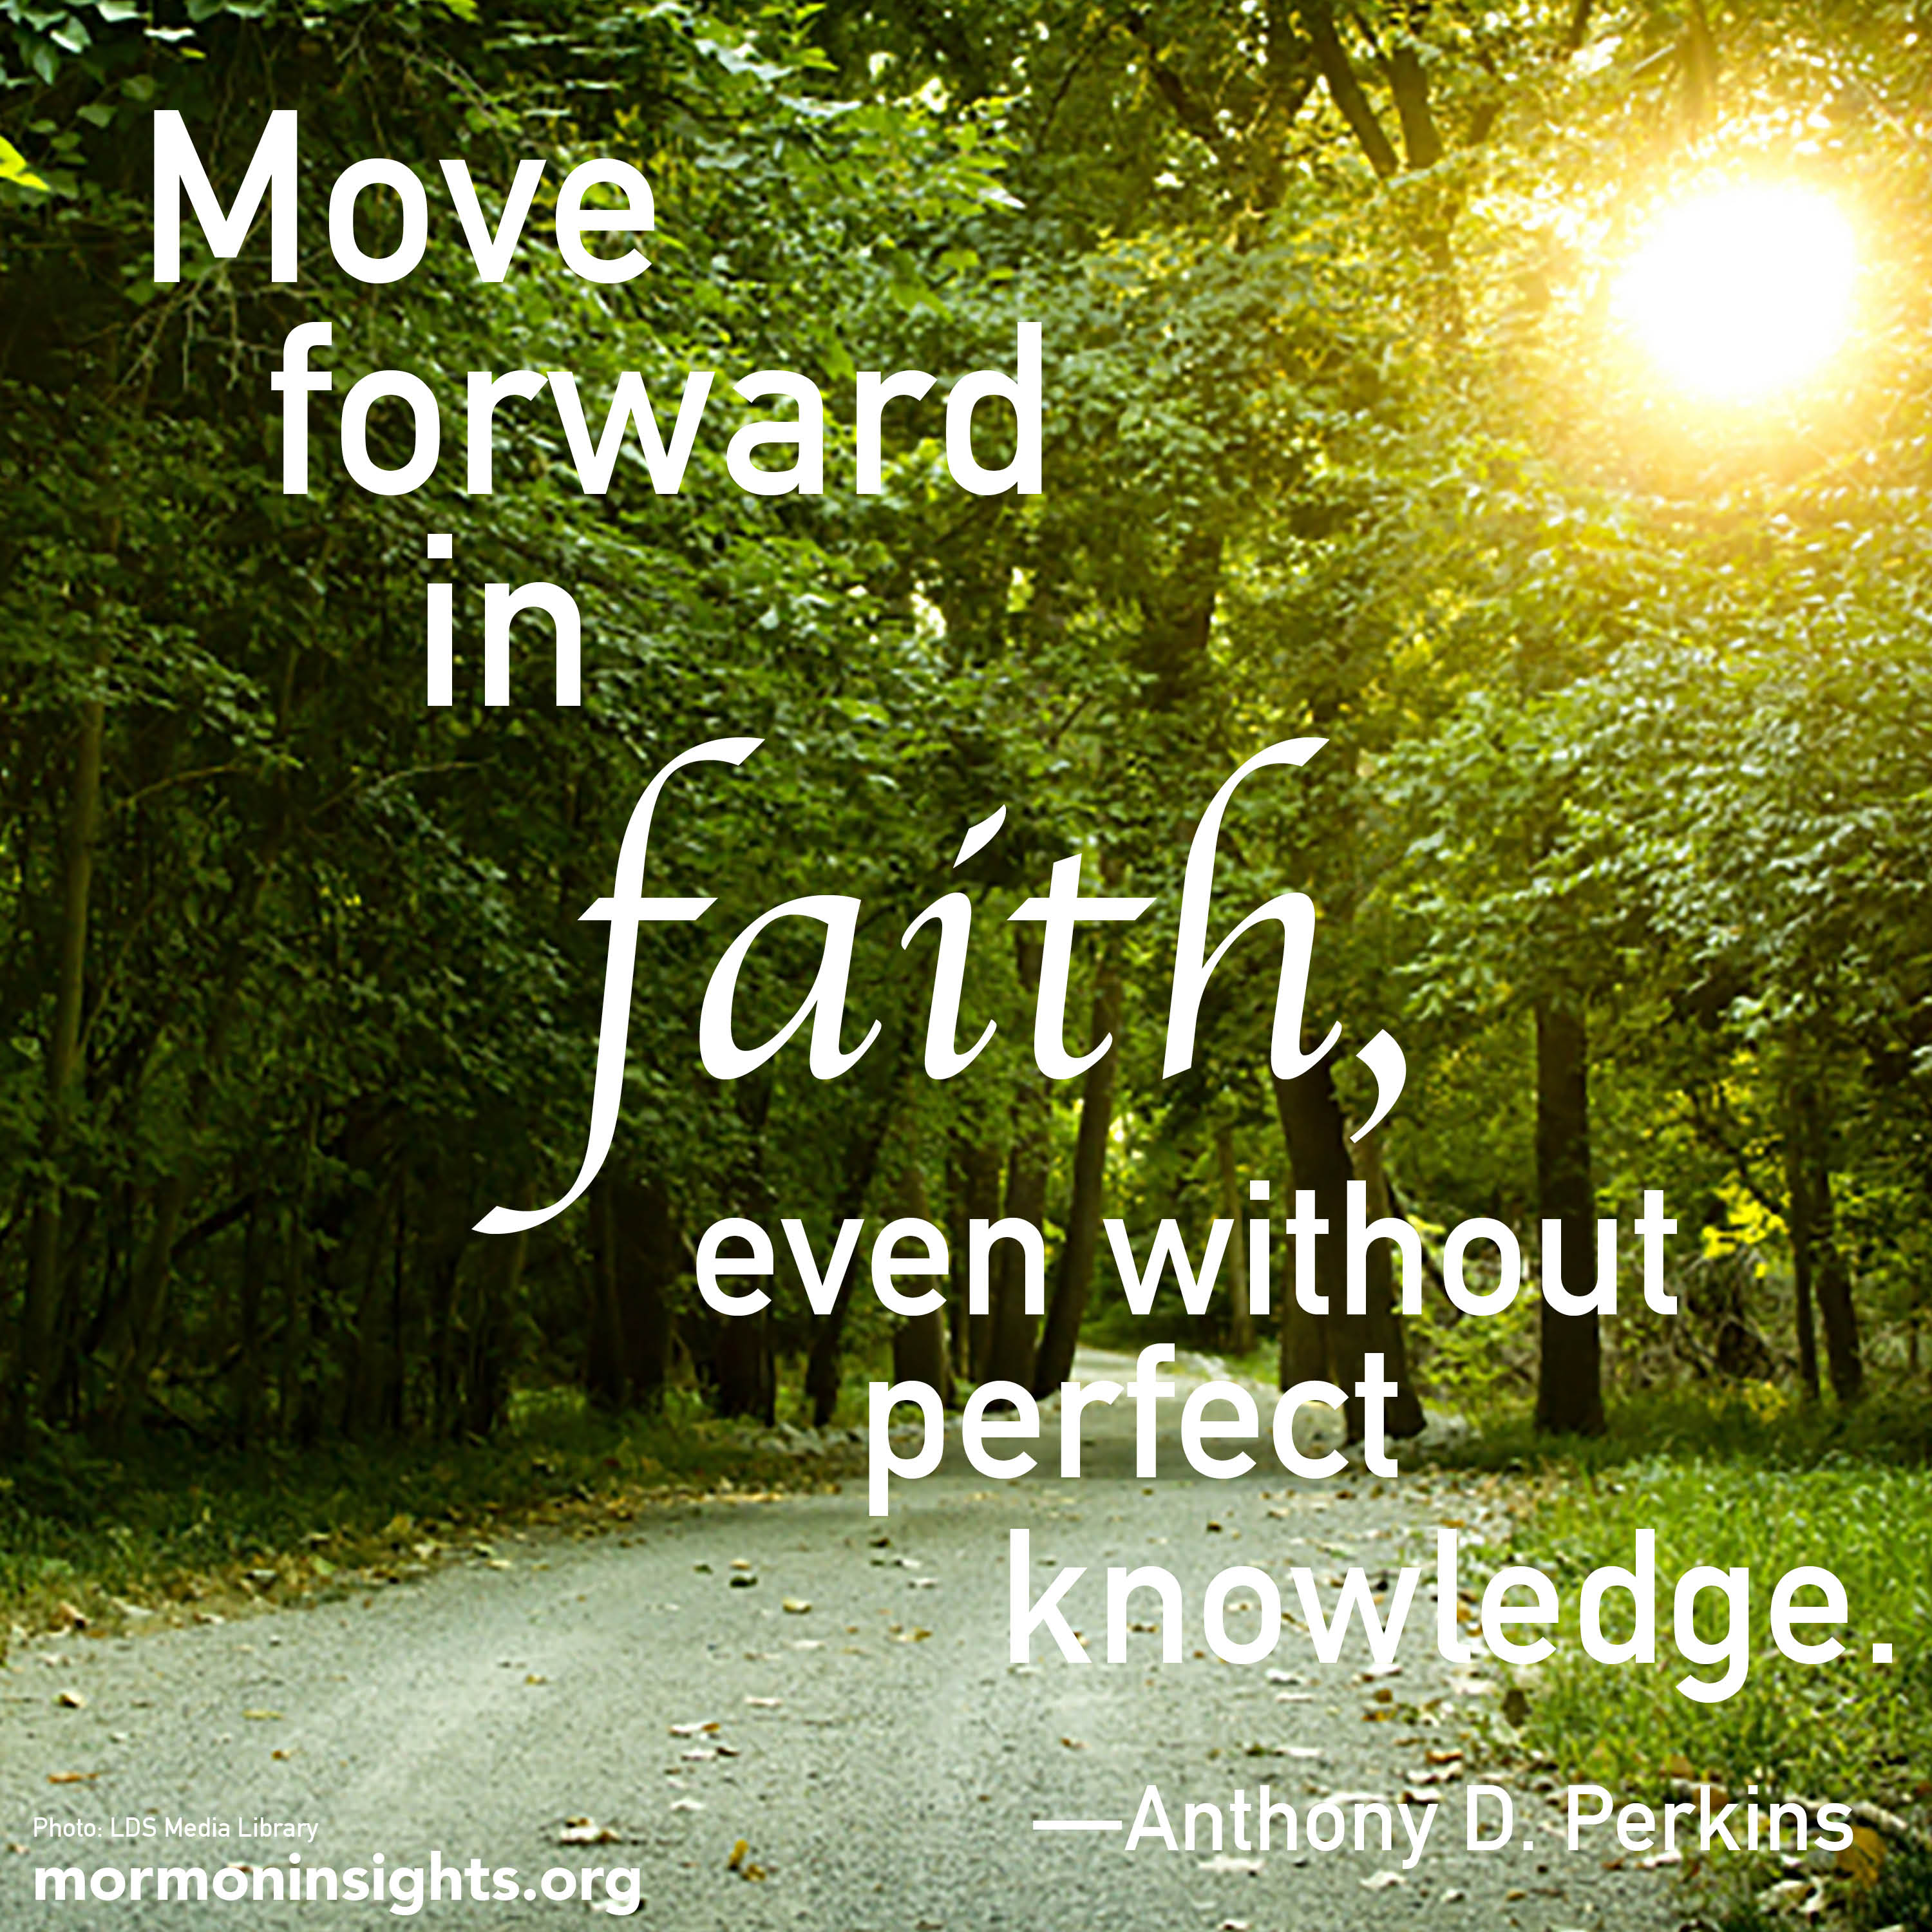 "Move forward in faith, even without perfect."